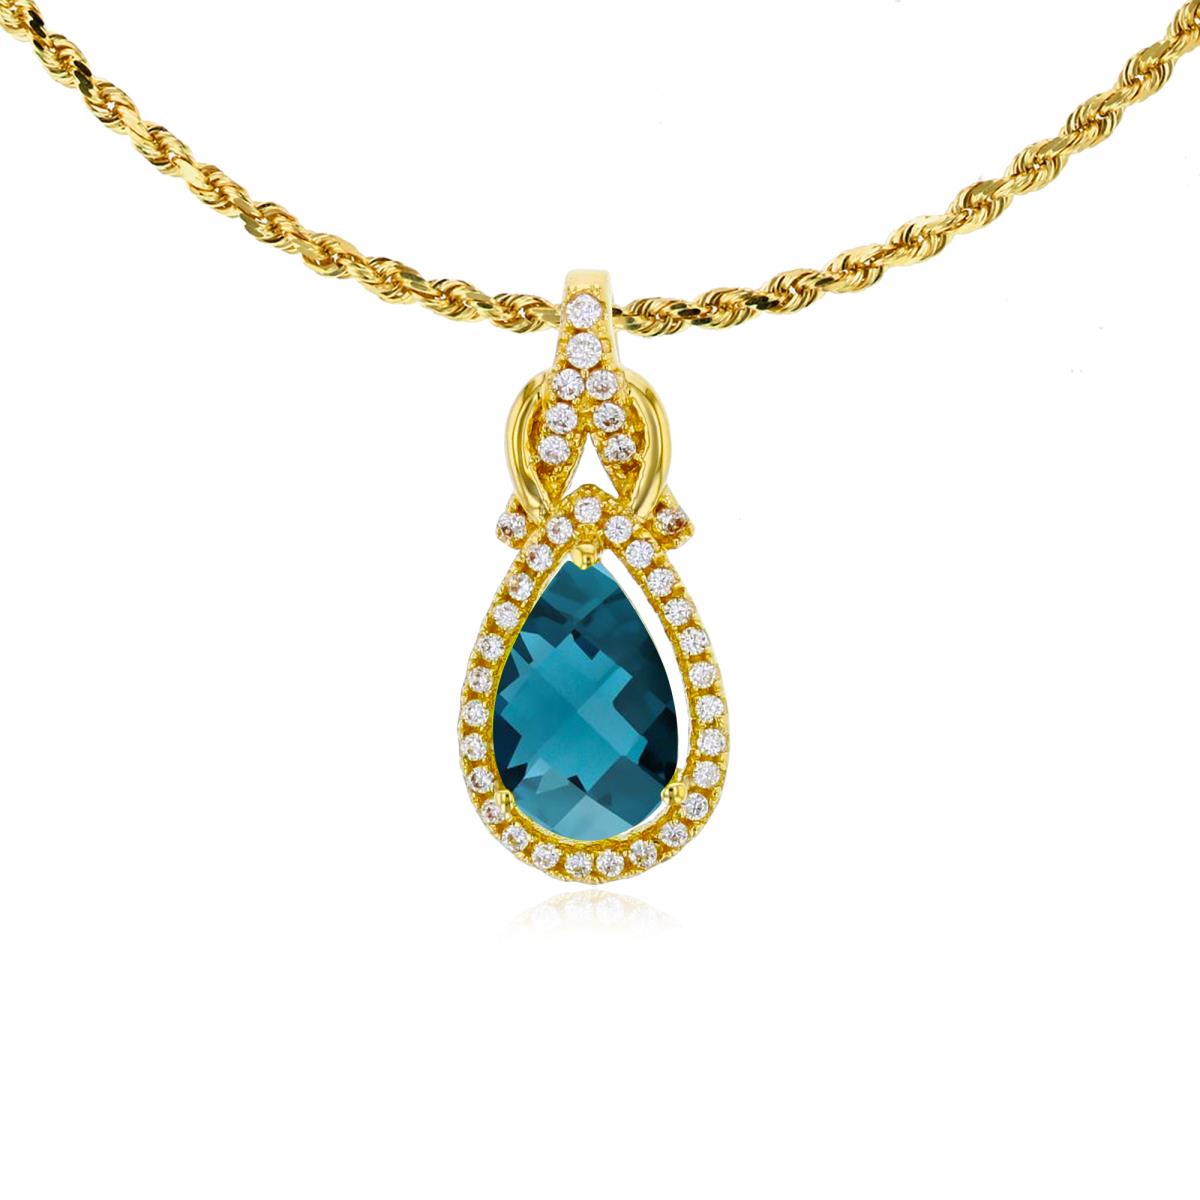 14K Yellow Gold 8x5mm Pear Cut London Blue Topaz & 0.11 CTTW Rnd Diamond Knot 18" Rope Chain Necklace